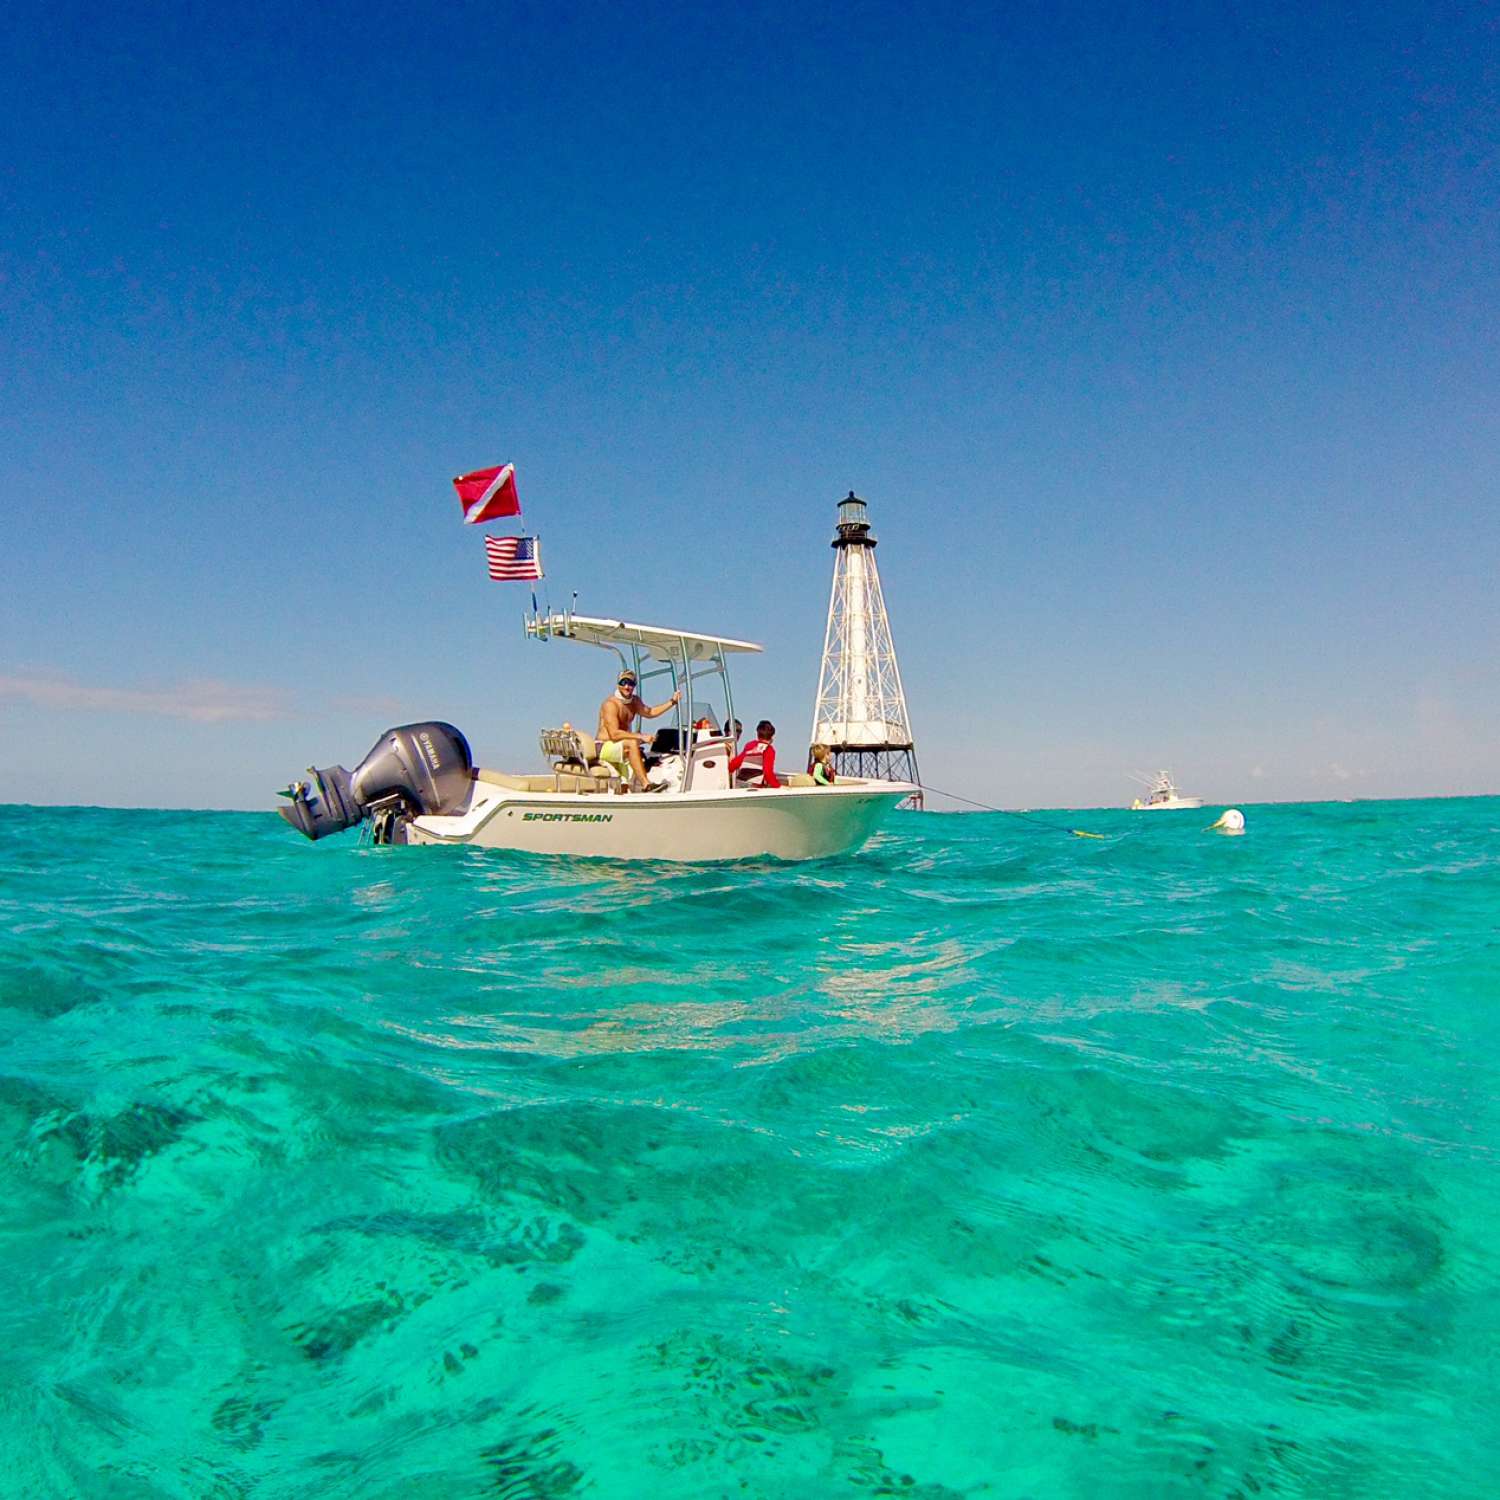 This photo was taken at Alligator Reef Lighthouse in Islamorada, FL....and yes, the water is ac...